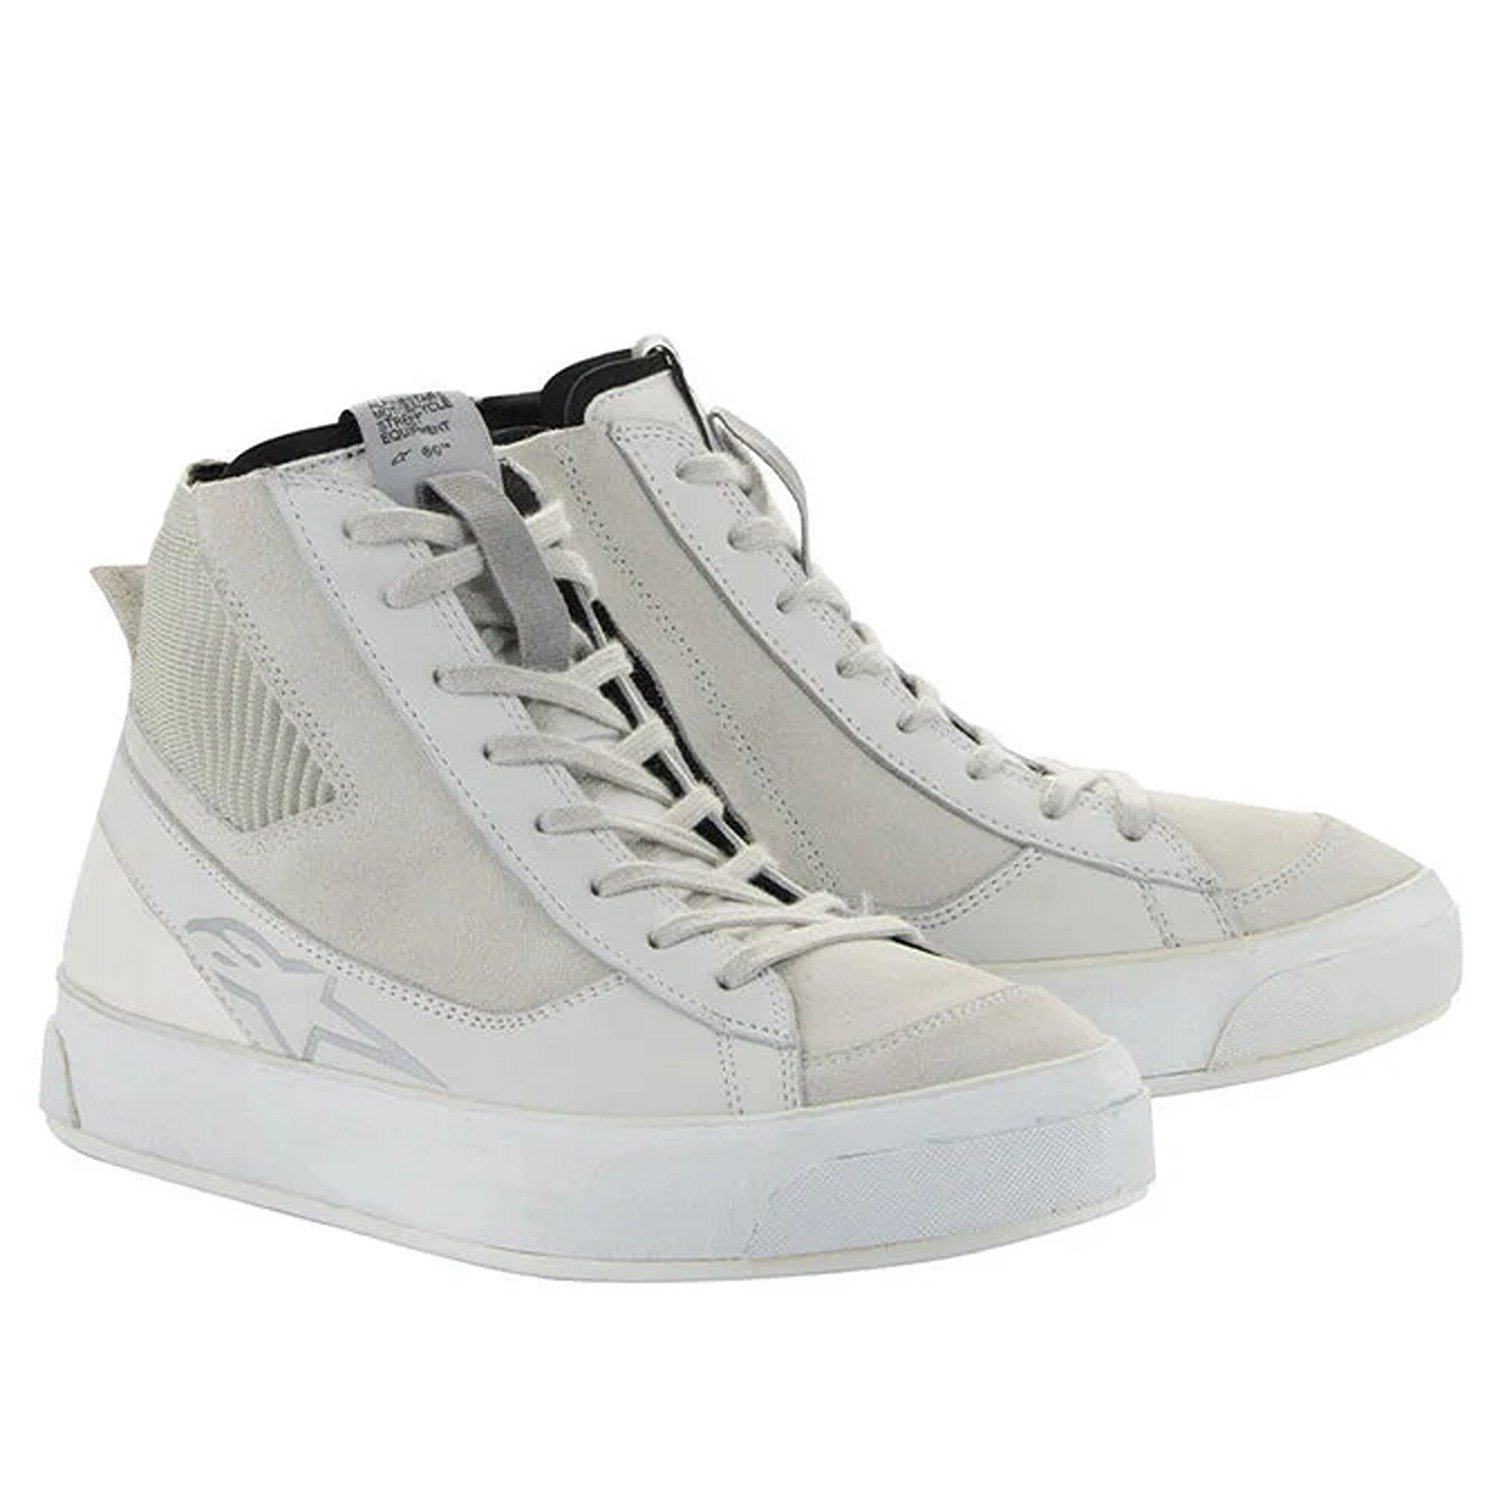 Image of Alpinestars Stated Shoes White Cool Gray Größe US 14